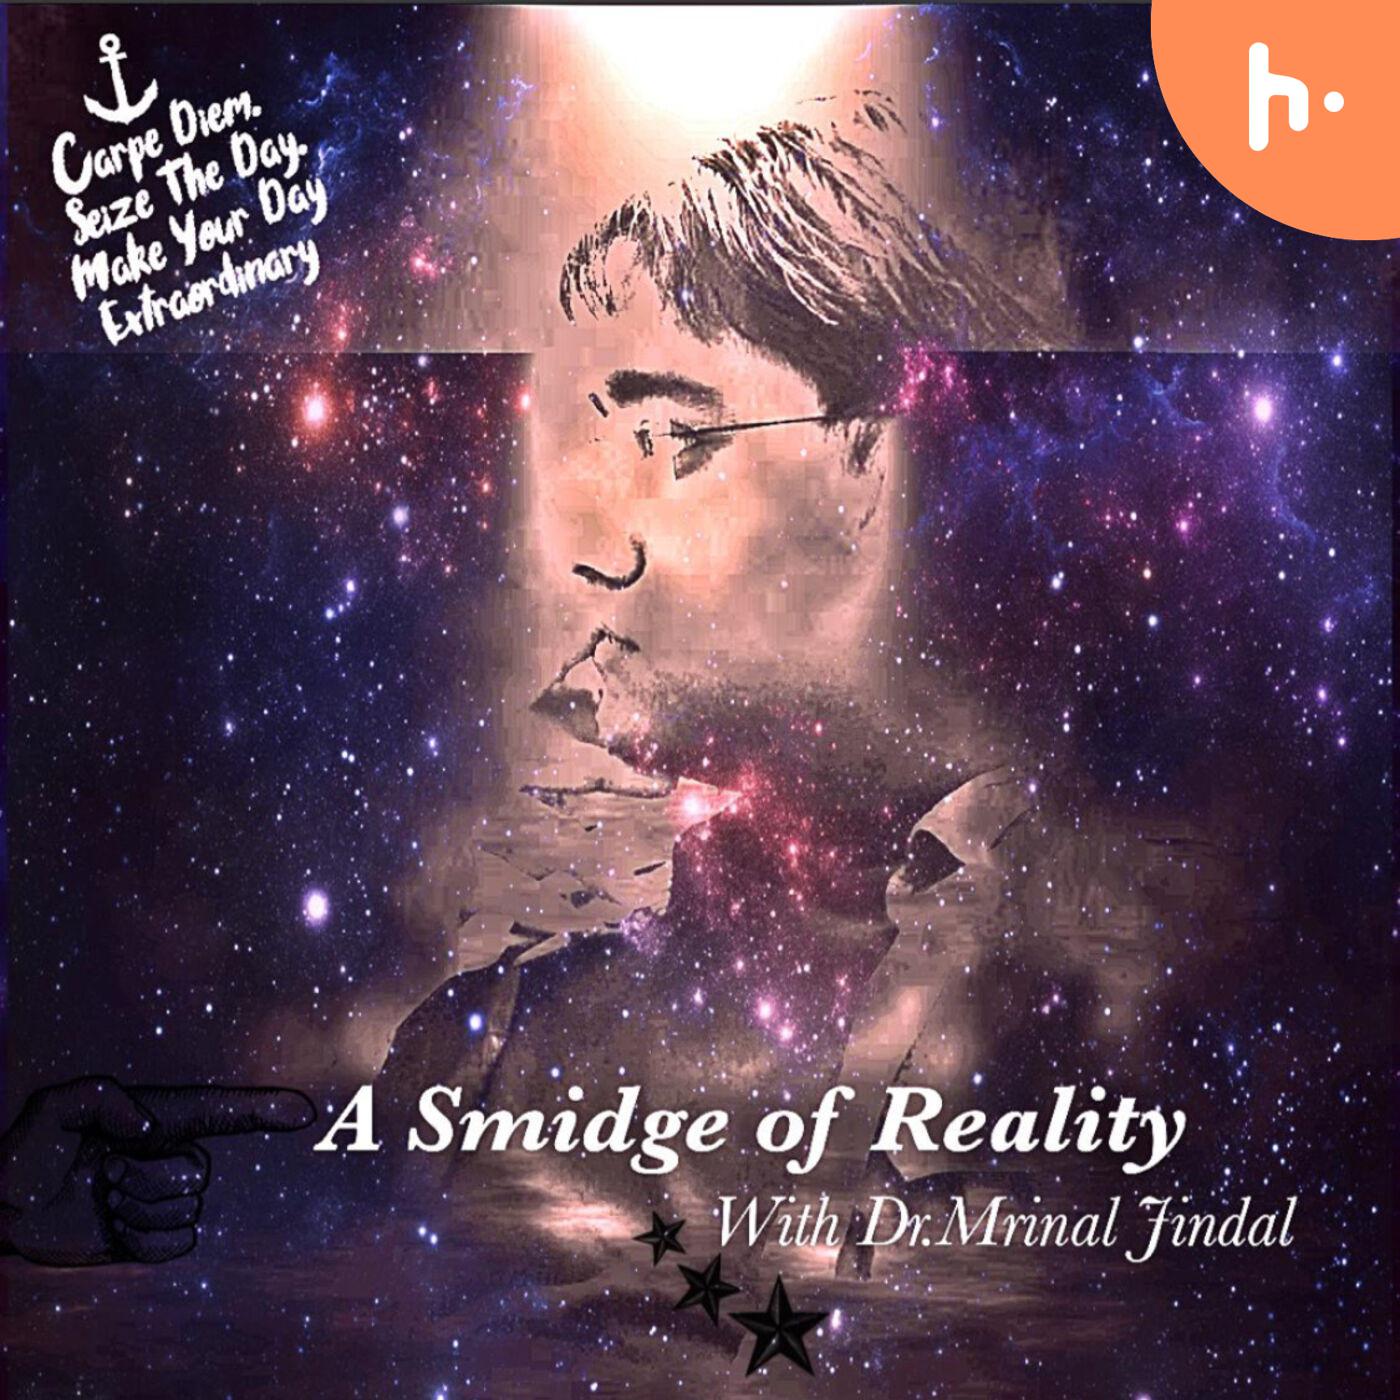 A Smidge of Reality with Dr.Mrinal Jindal